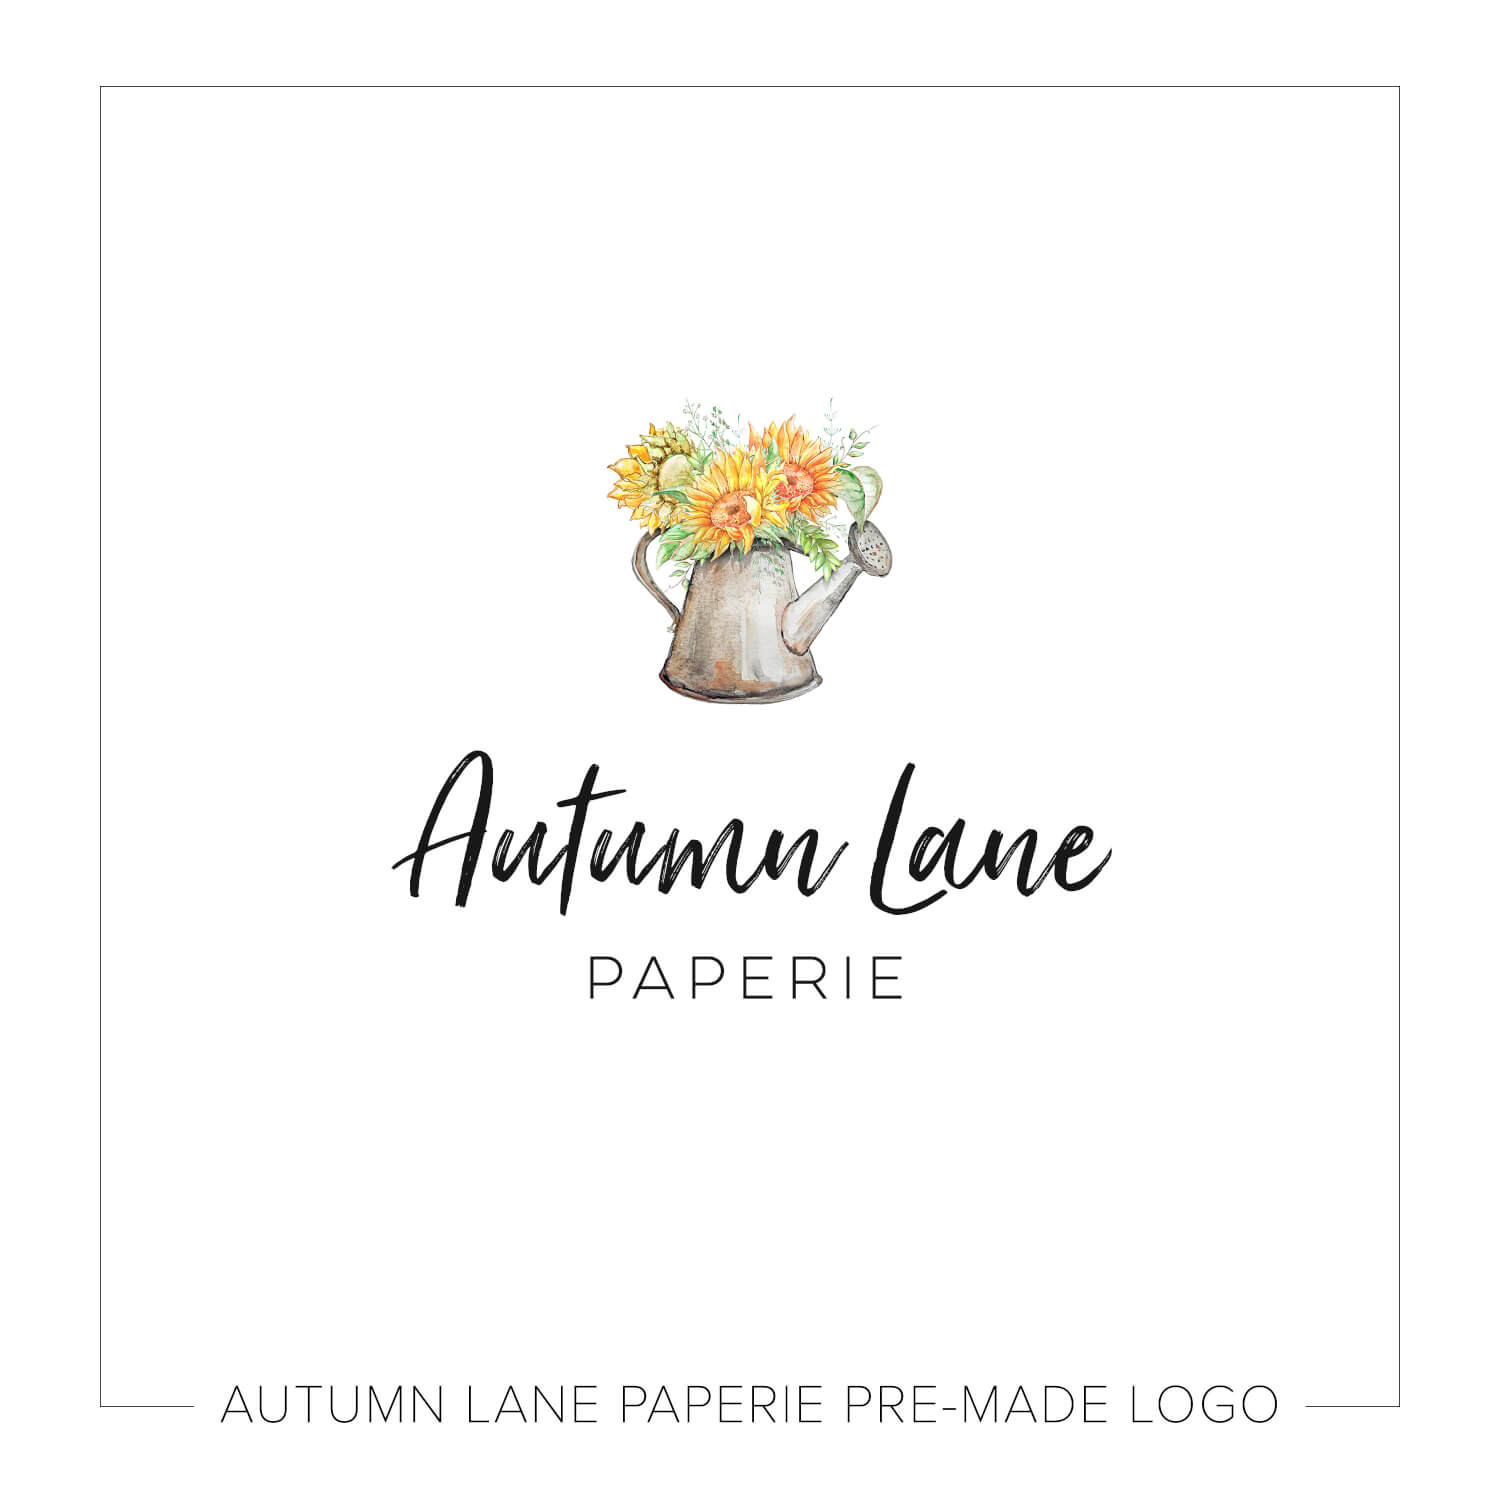 A Yellow Flower Logo - Yellow Flower Watering Can Logo J25. Autumn Lane Paperie